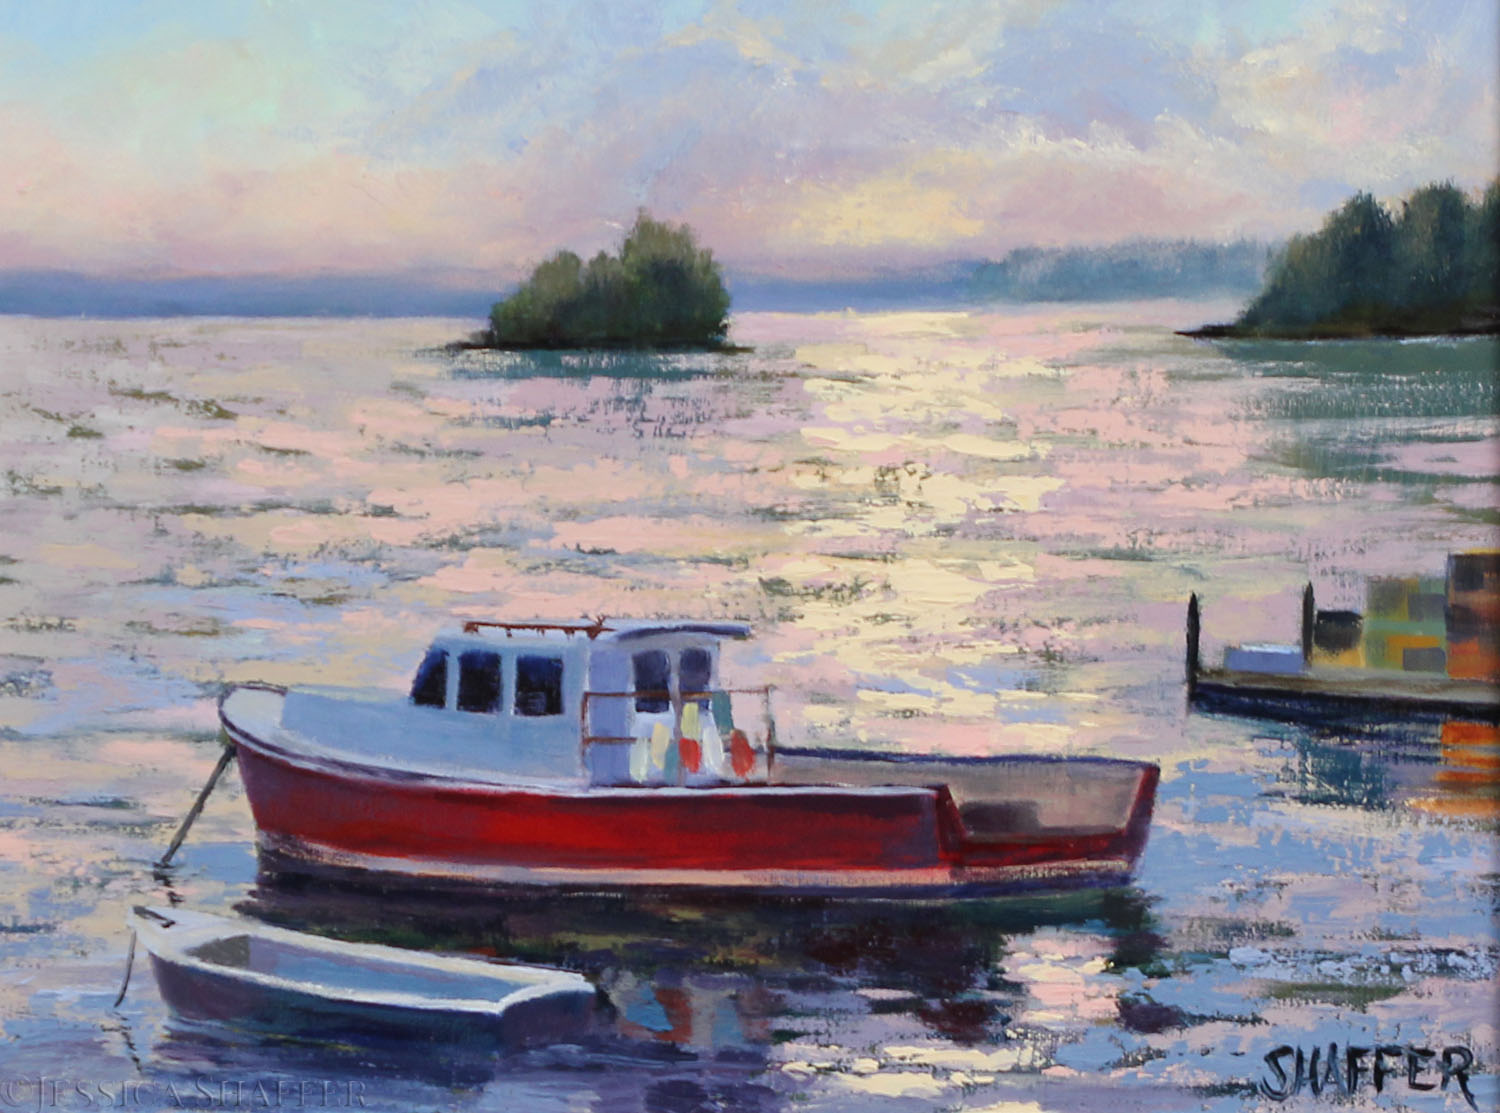 'Friendship Cove Sunset' landscape oil painting of a lobster boat at sunset in Friendship Cove, Maine.